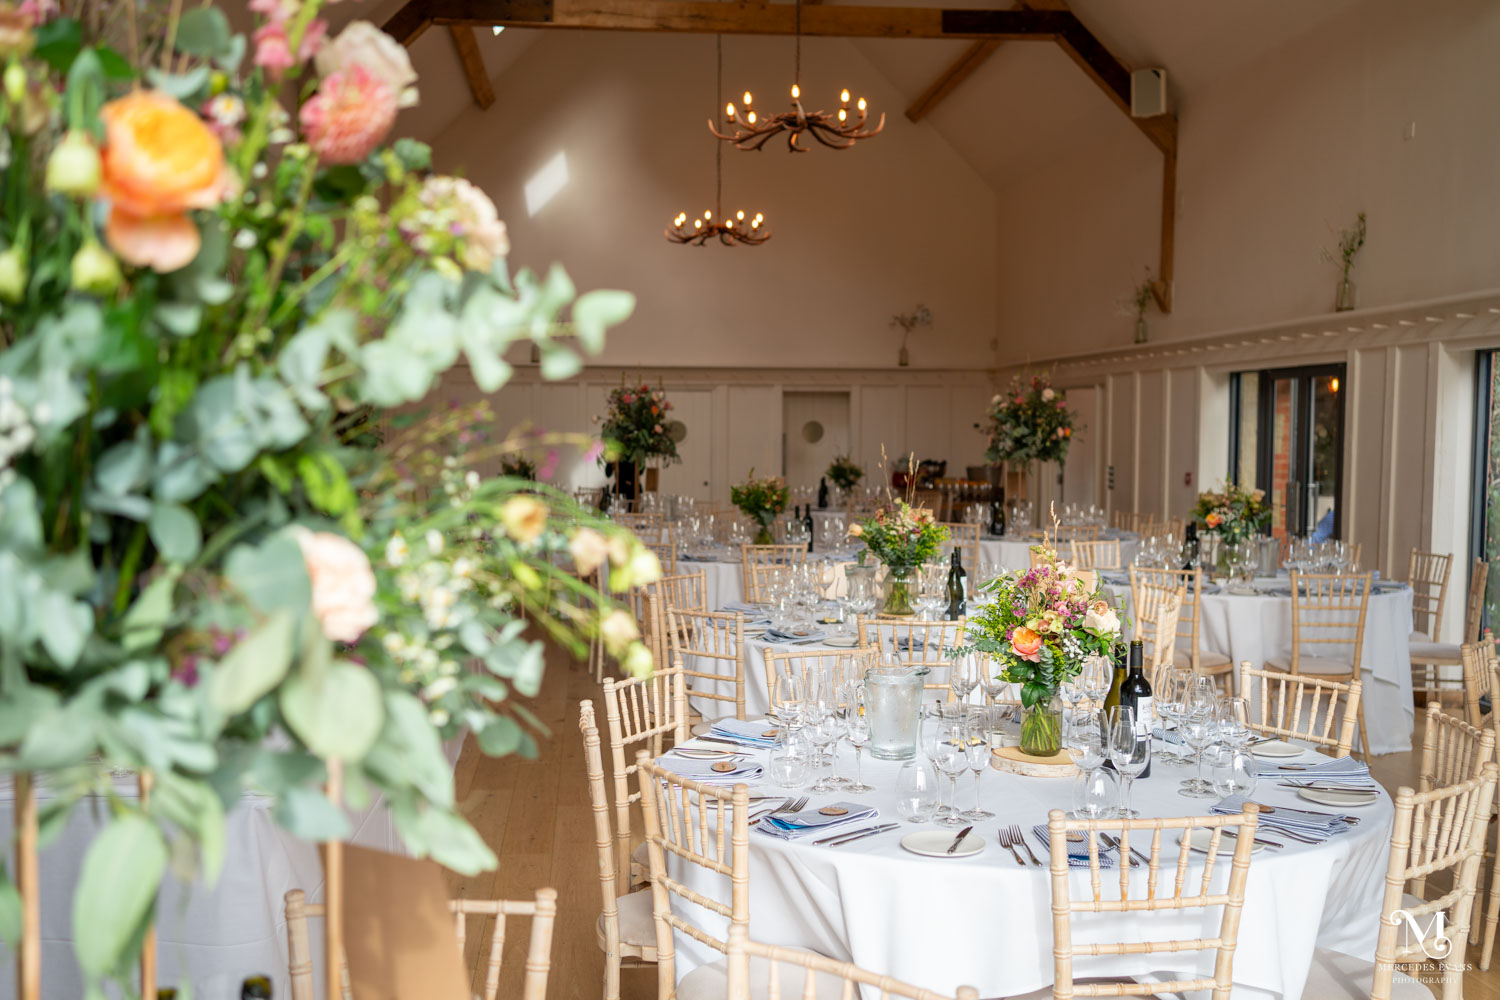 the high-vaulted hall set for the wedding breakfast at Millbridge court, with round tables